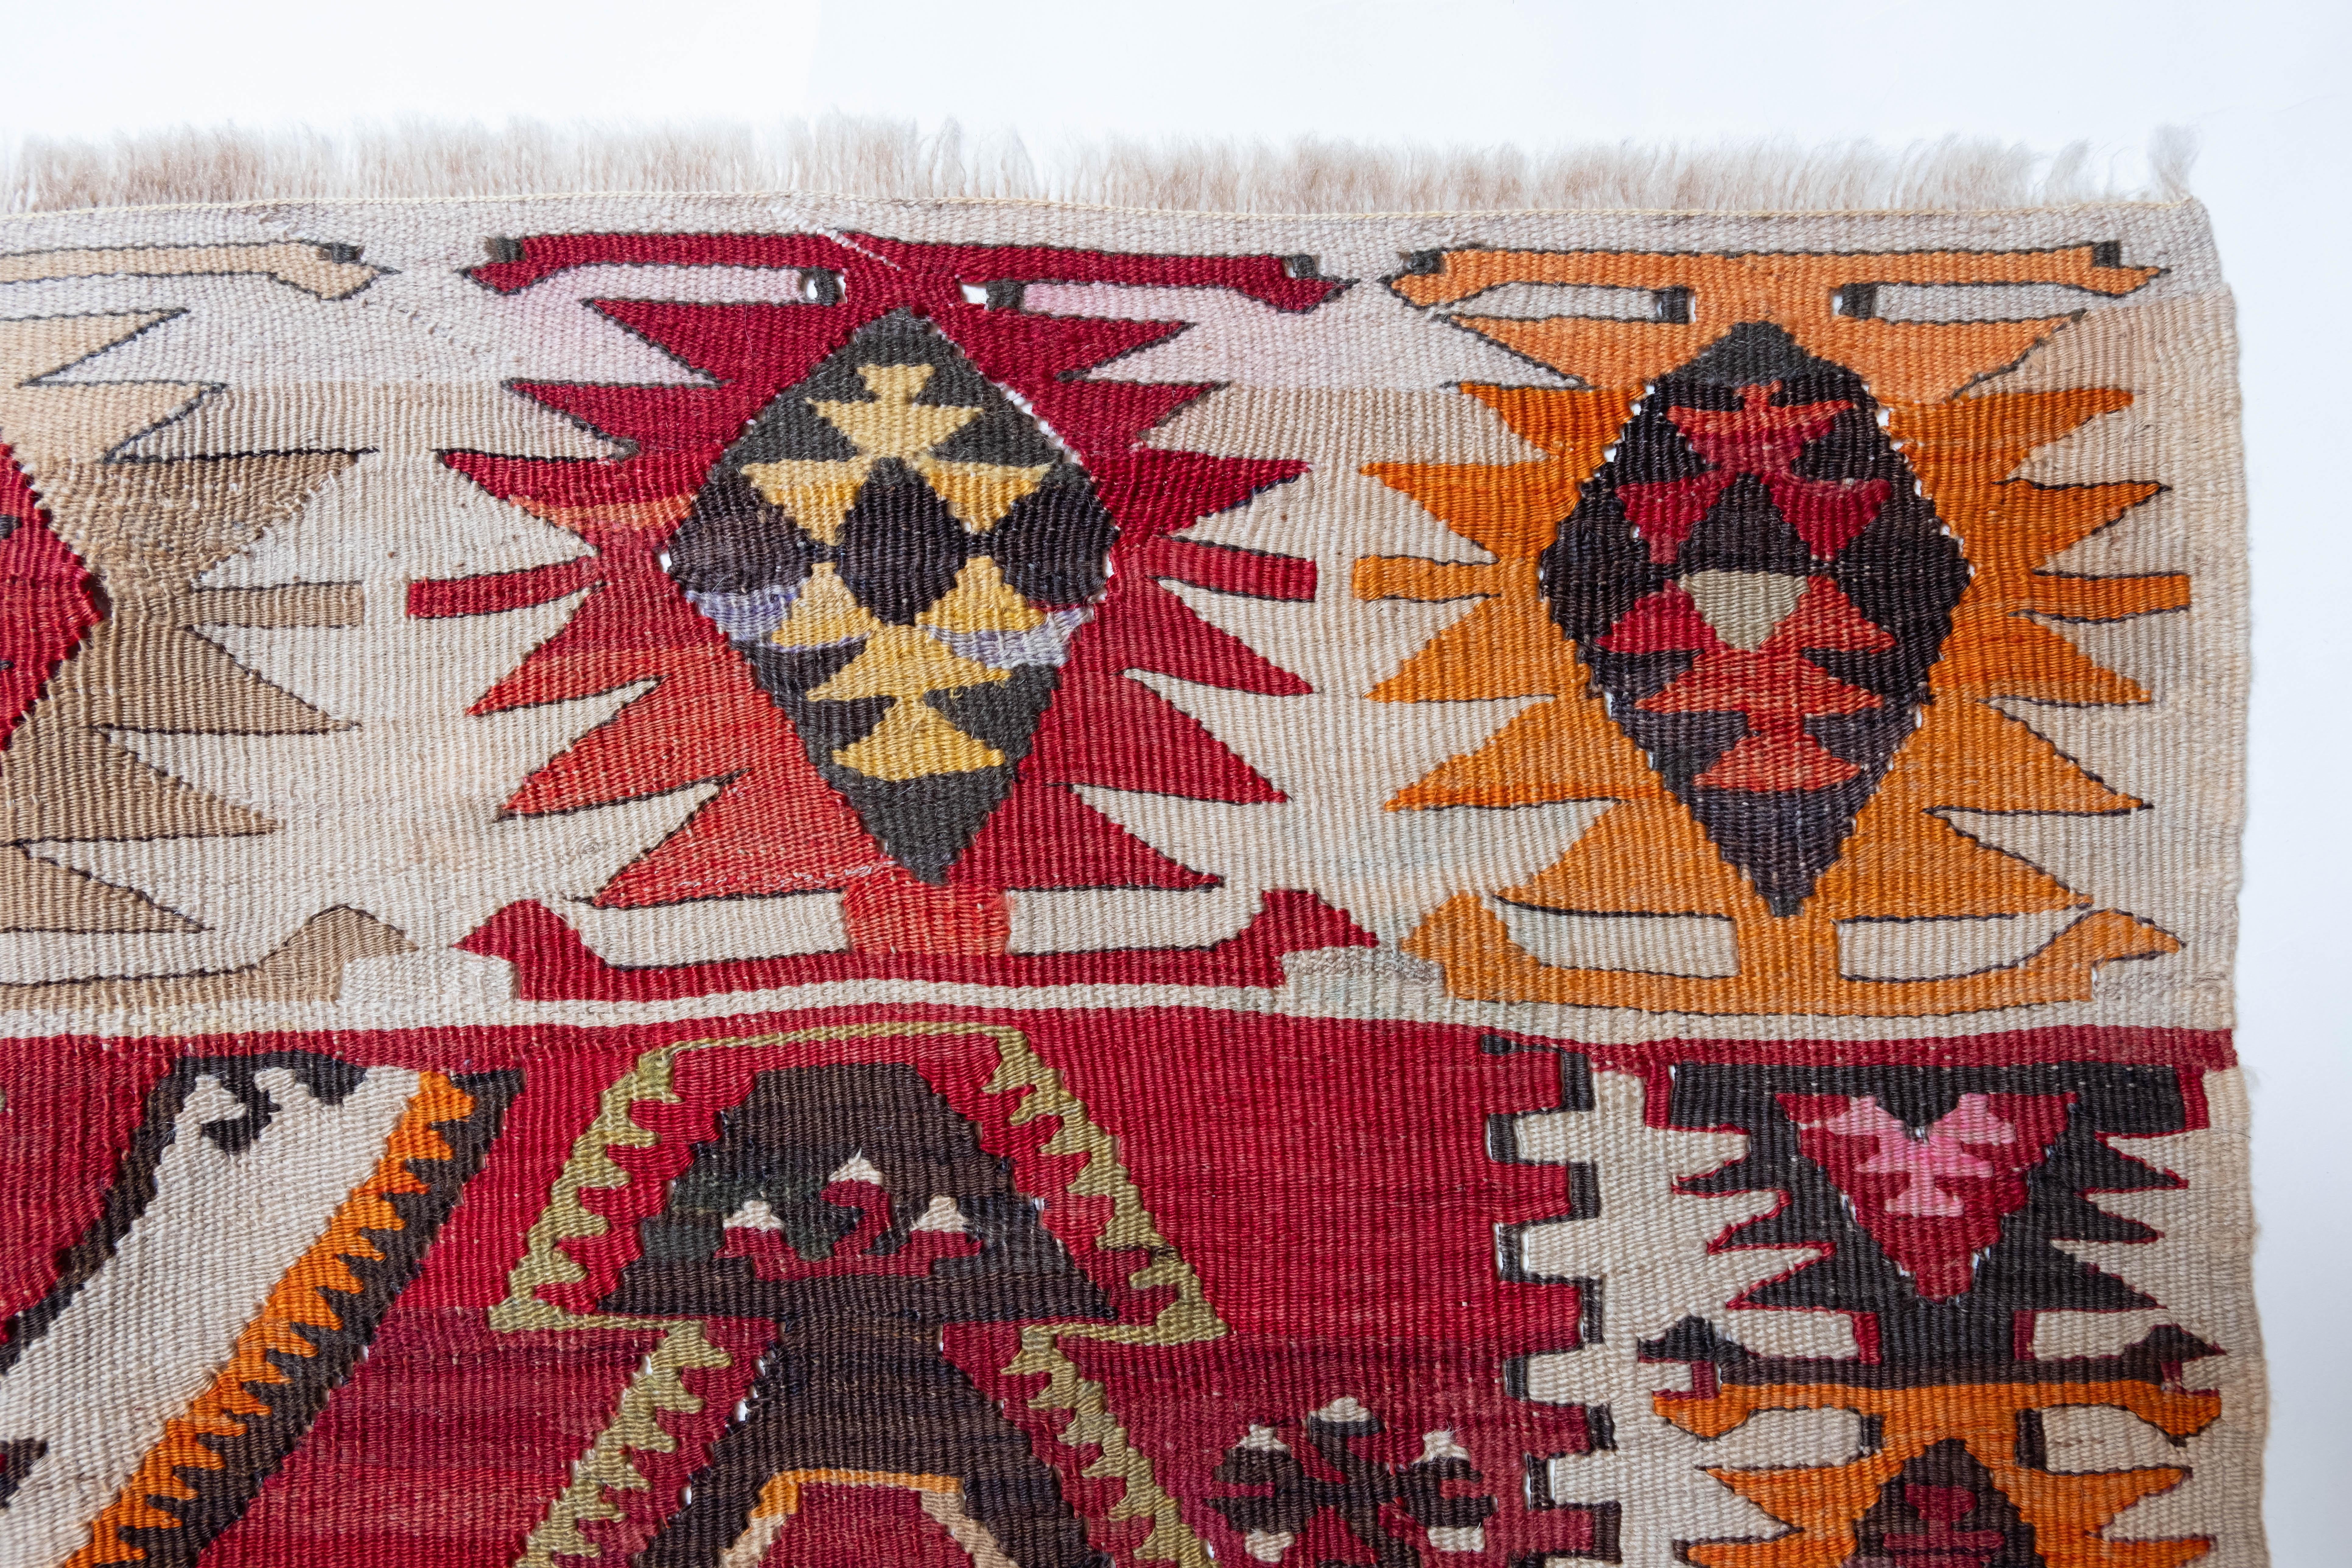 This is Eastern Anatolian Antique Rashwan Design Kilim, from the Kayseri region with a rare and beautiful color composition.

This highly collectible antique kilim has wonderful special colors and textures that are typical of an old kilim in good